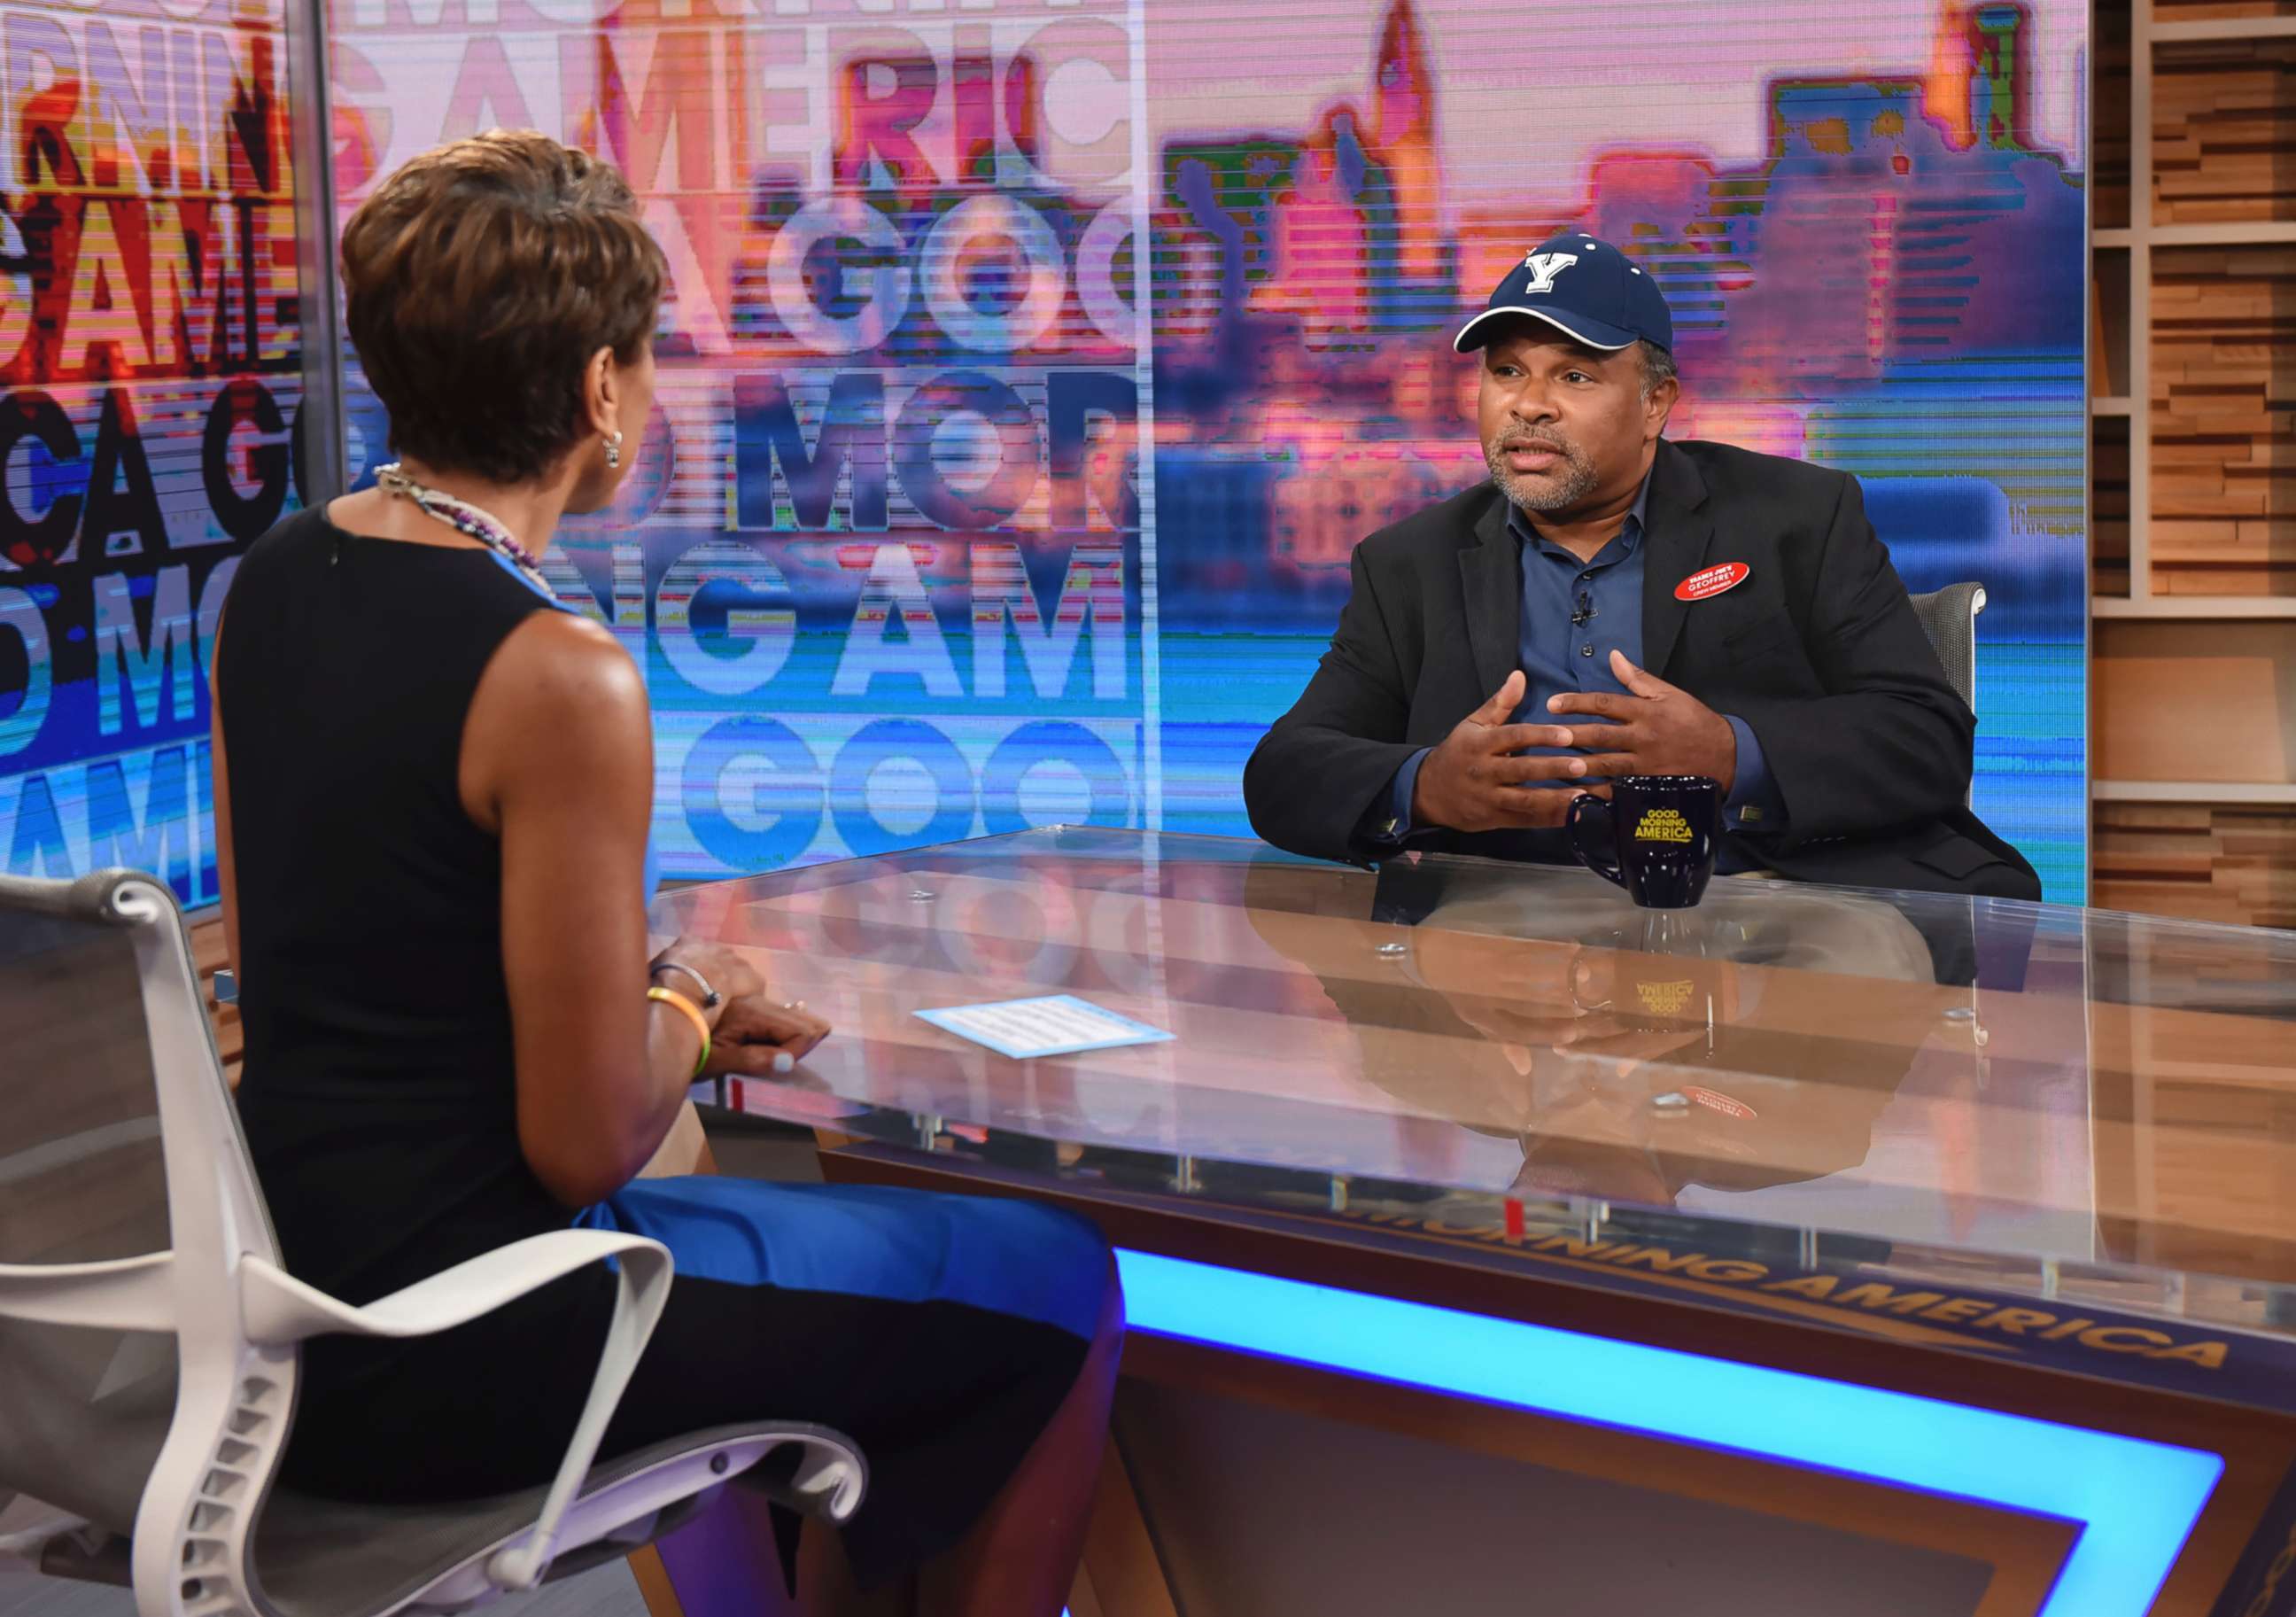 PHOTO: This image released by ABC shows co-host Robin Roberts, left, with "The Cosby Show" actor Geoffrey Owens during an interview on "Good Morning America," Tuesday, Sept. 4, 2018, in New York.